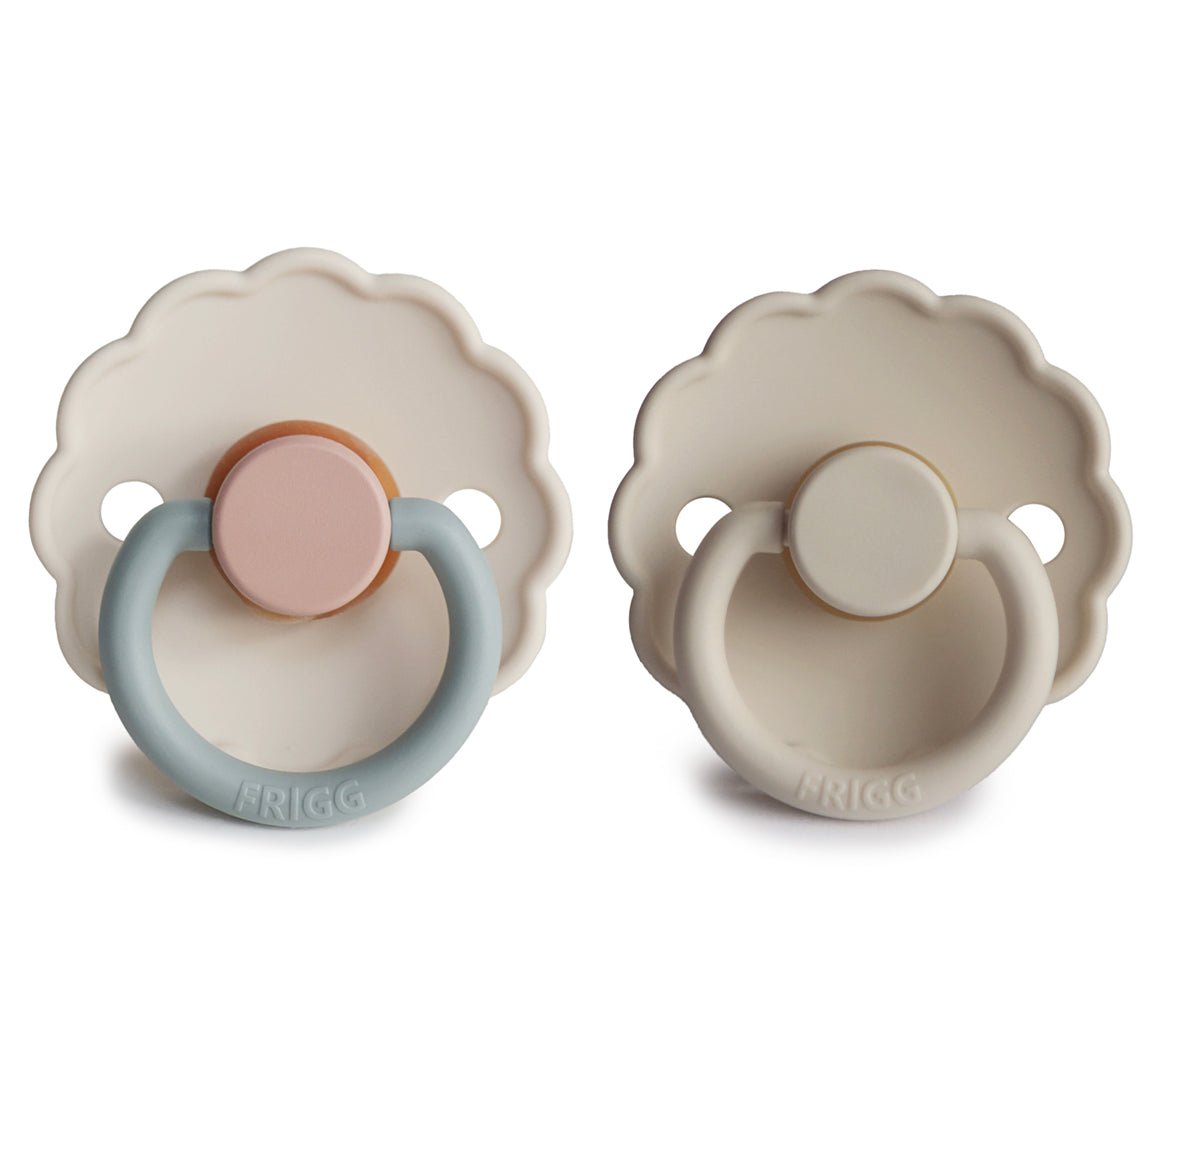 FRIGG Daisy Natural Rubber Pacifier Colorblock (Cotton Candy/Sandstone) - Harp Angel Boutique